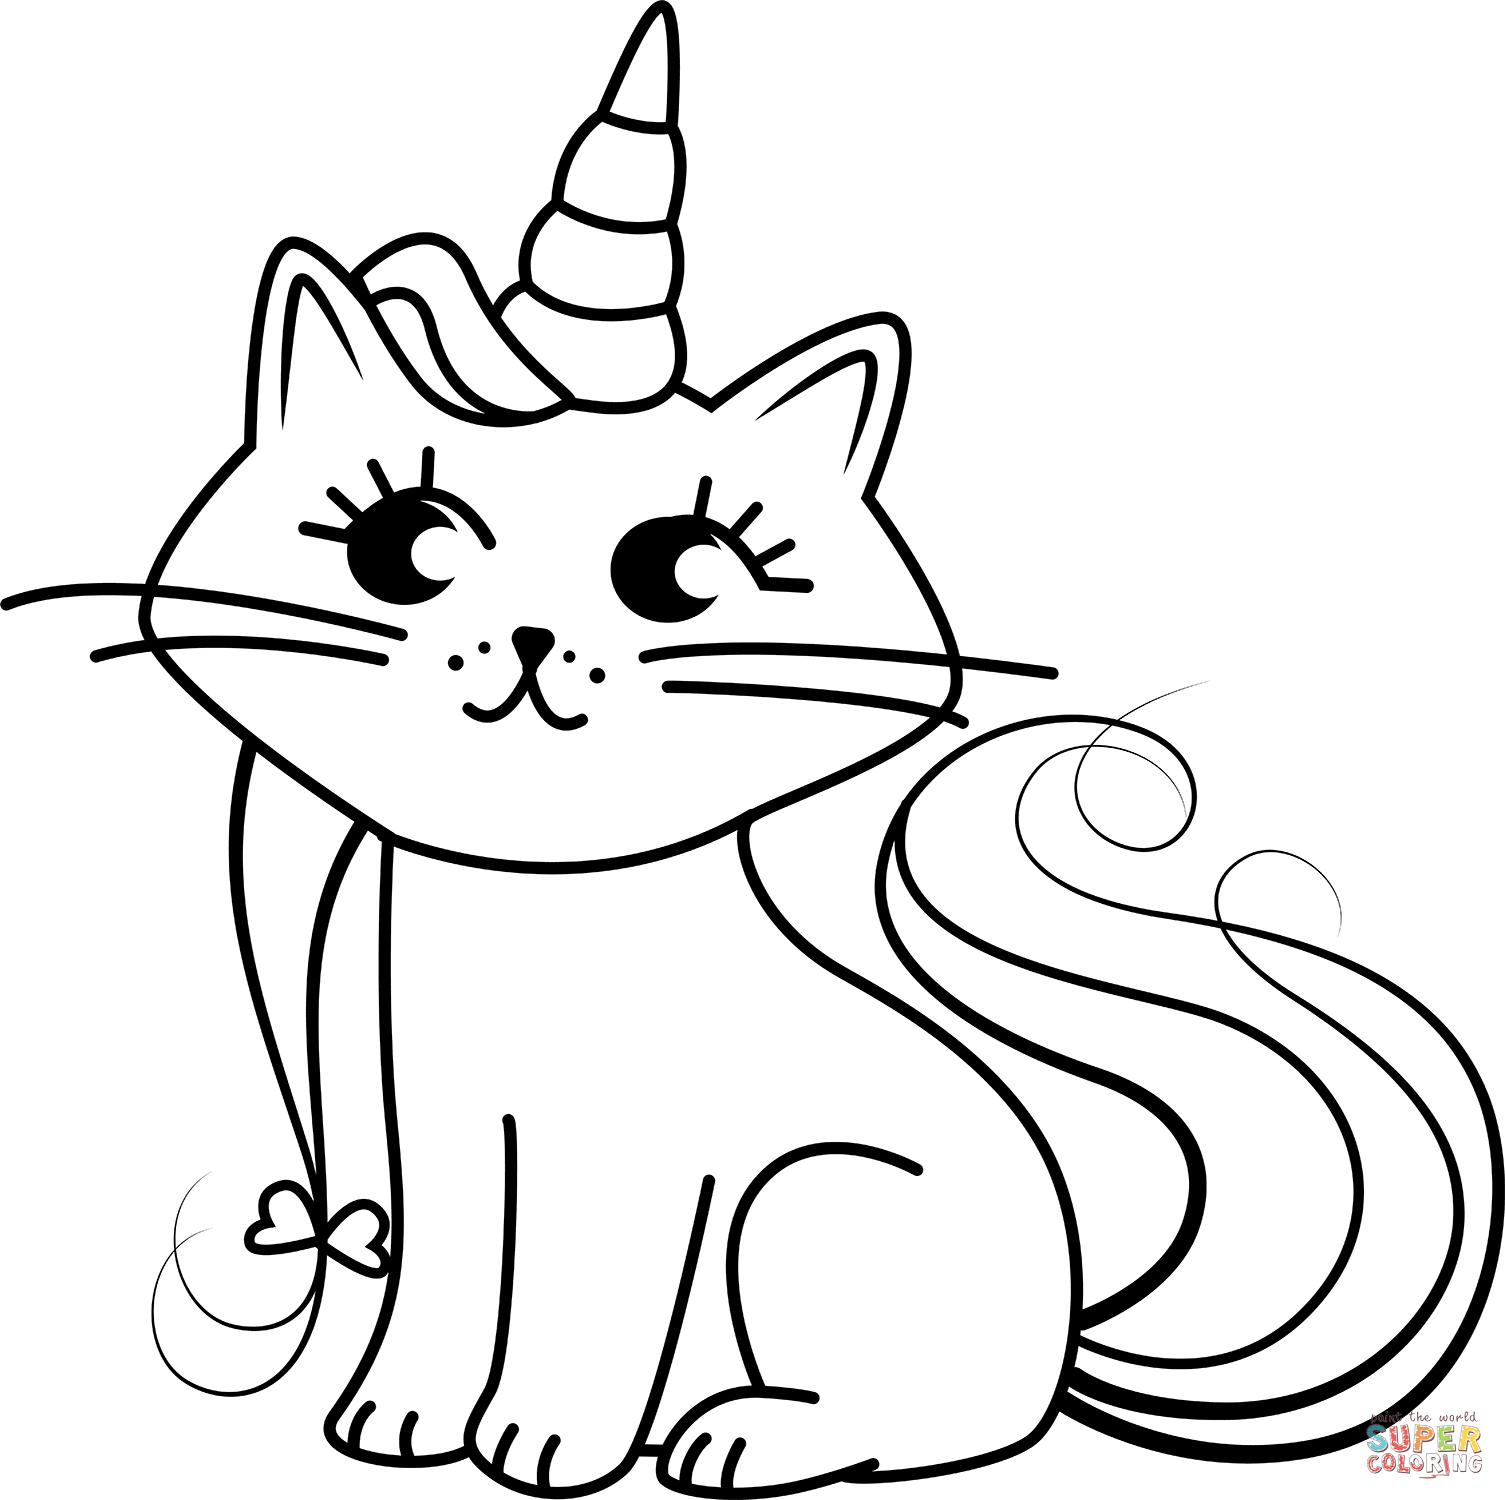 Unicorn cat coloring page free printable coloring pages